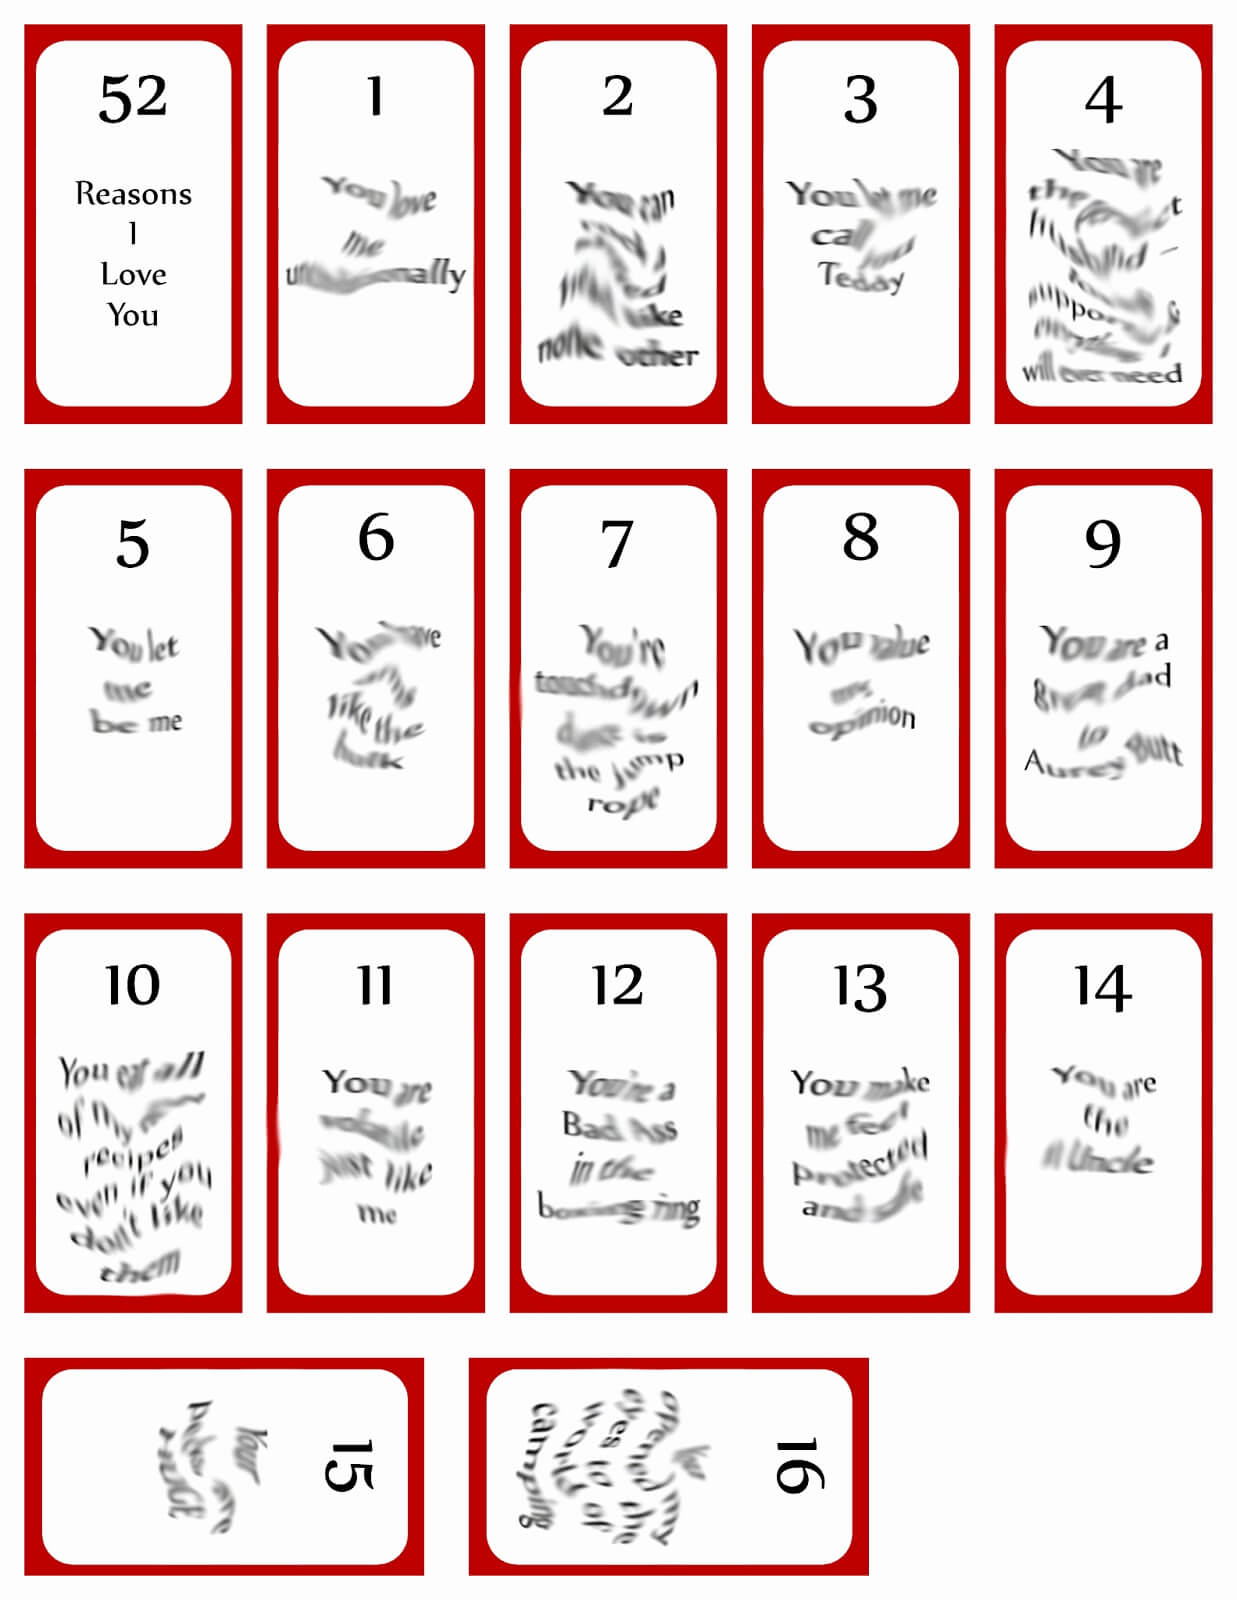 52 Reasons Why I Love You Cards Printable Templates Free Throughout 52 Reasons Why I Love You Cards Templates Free